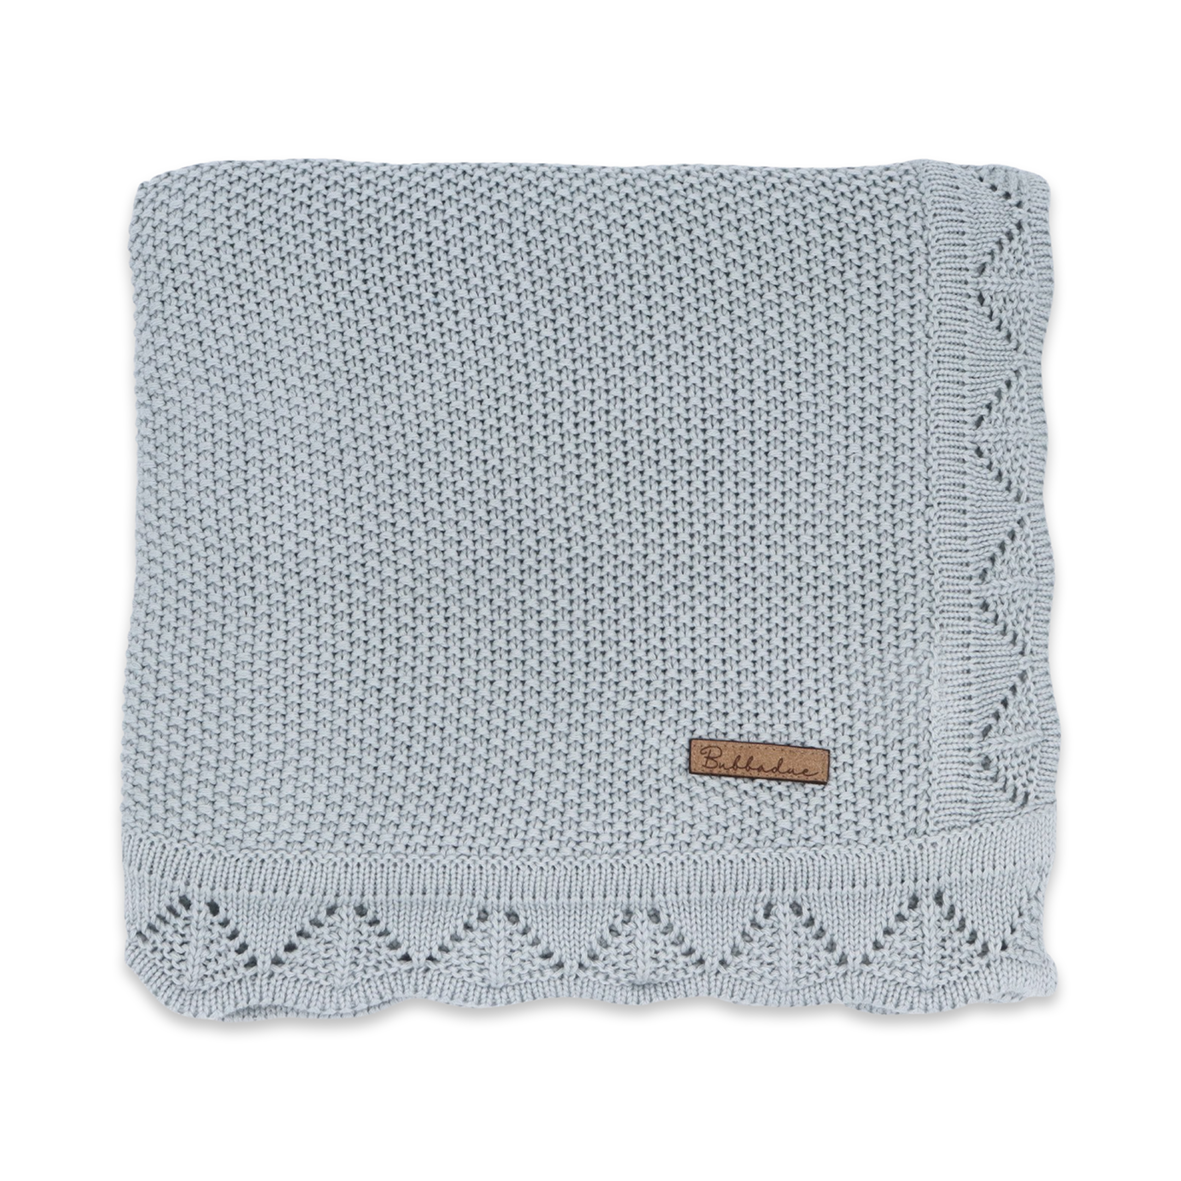 Bubbadue Luxury Knitted Baby Blankets - Bubbadue